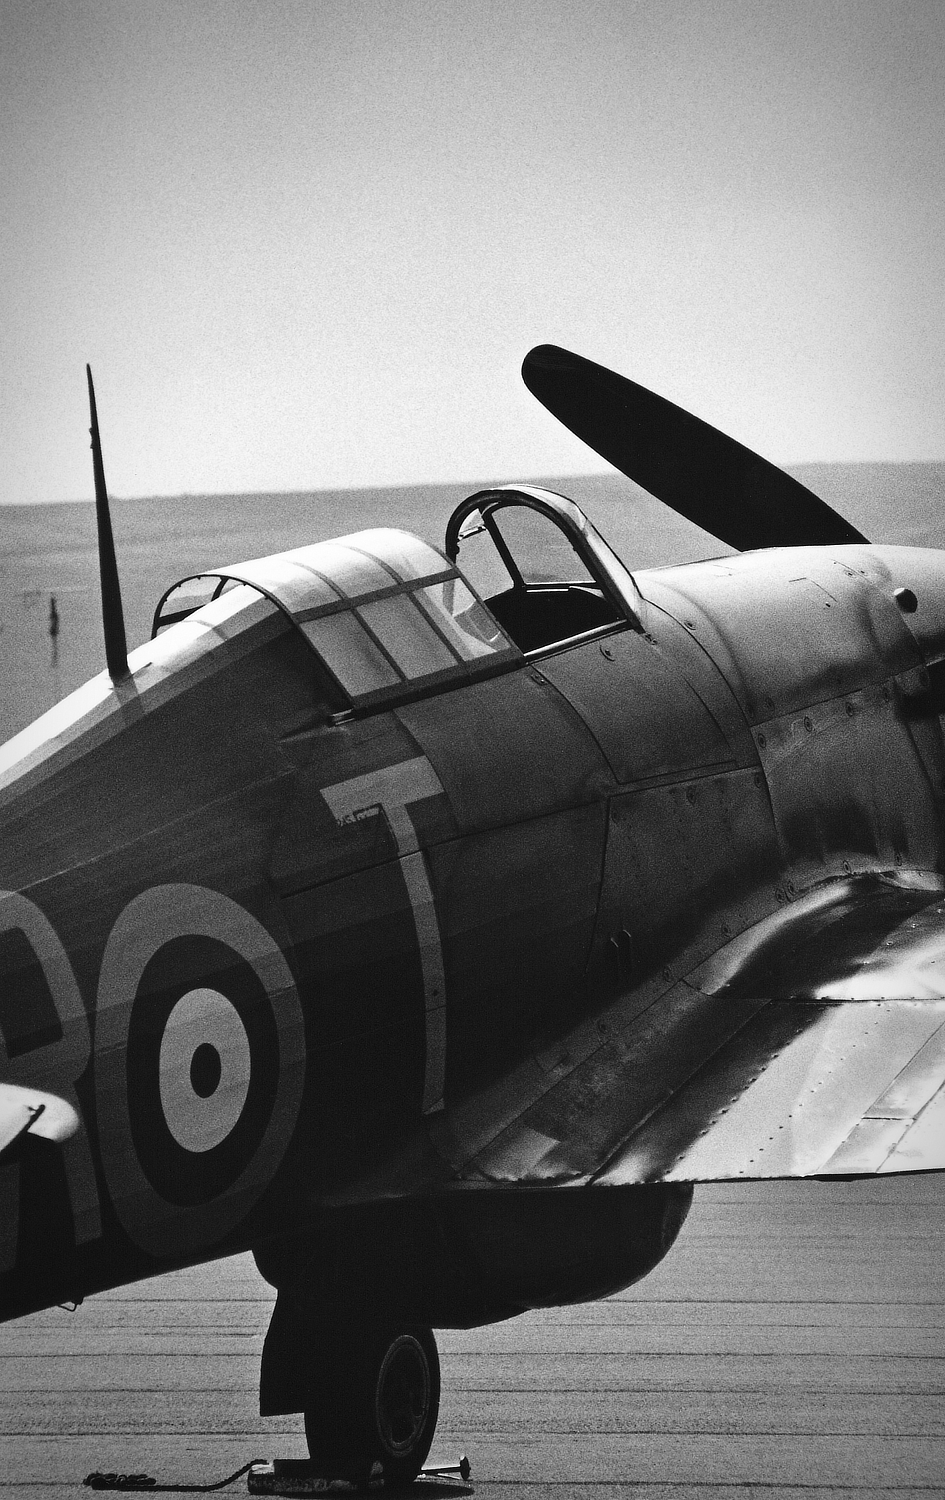 Black and white photo of a Hawker Hurricane at Duxford